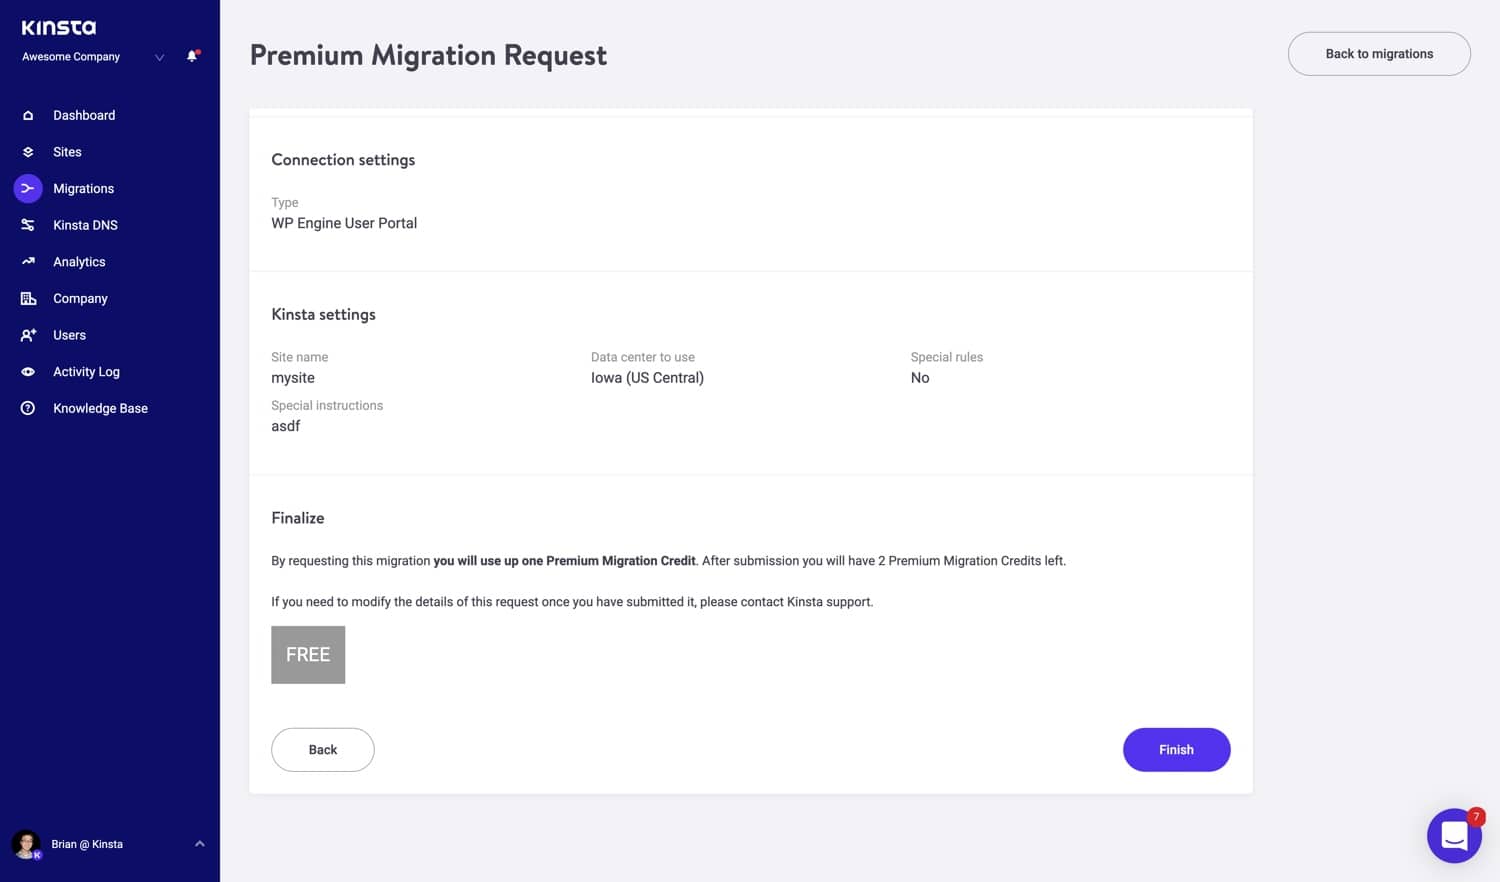 Review and submit your migration.